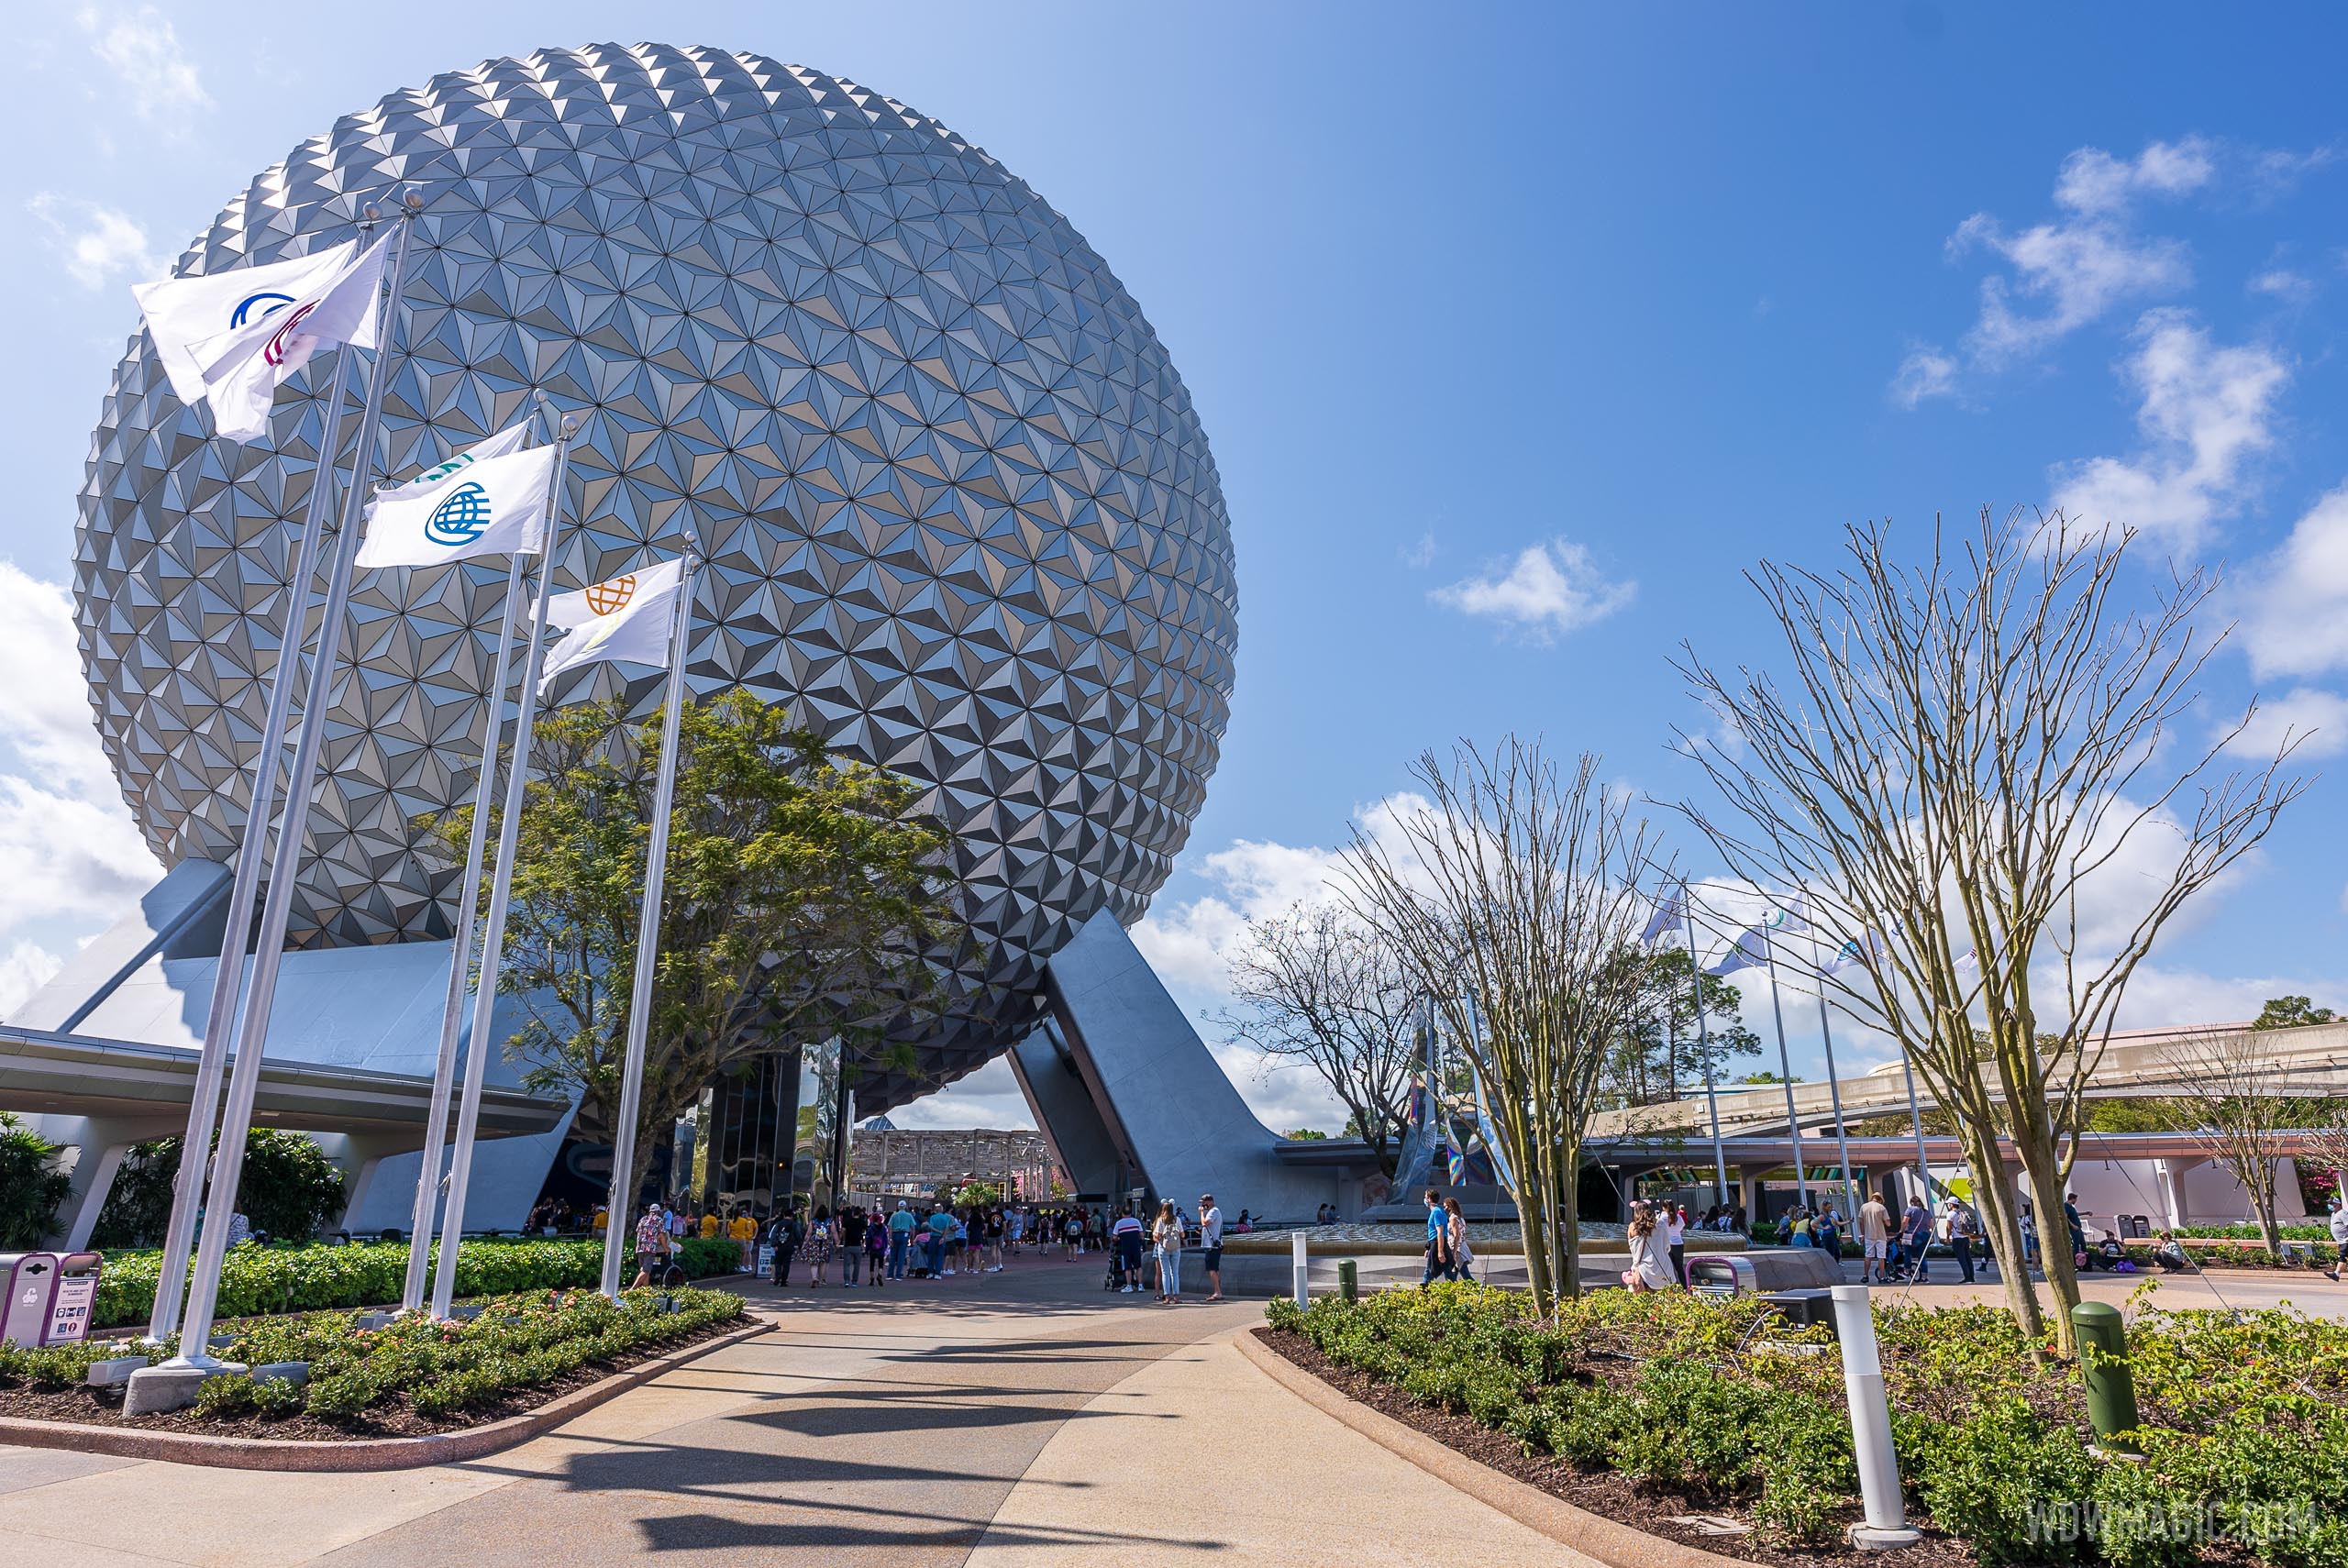 VIDEO - EPCOT main entrance debuts new background music